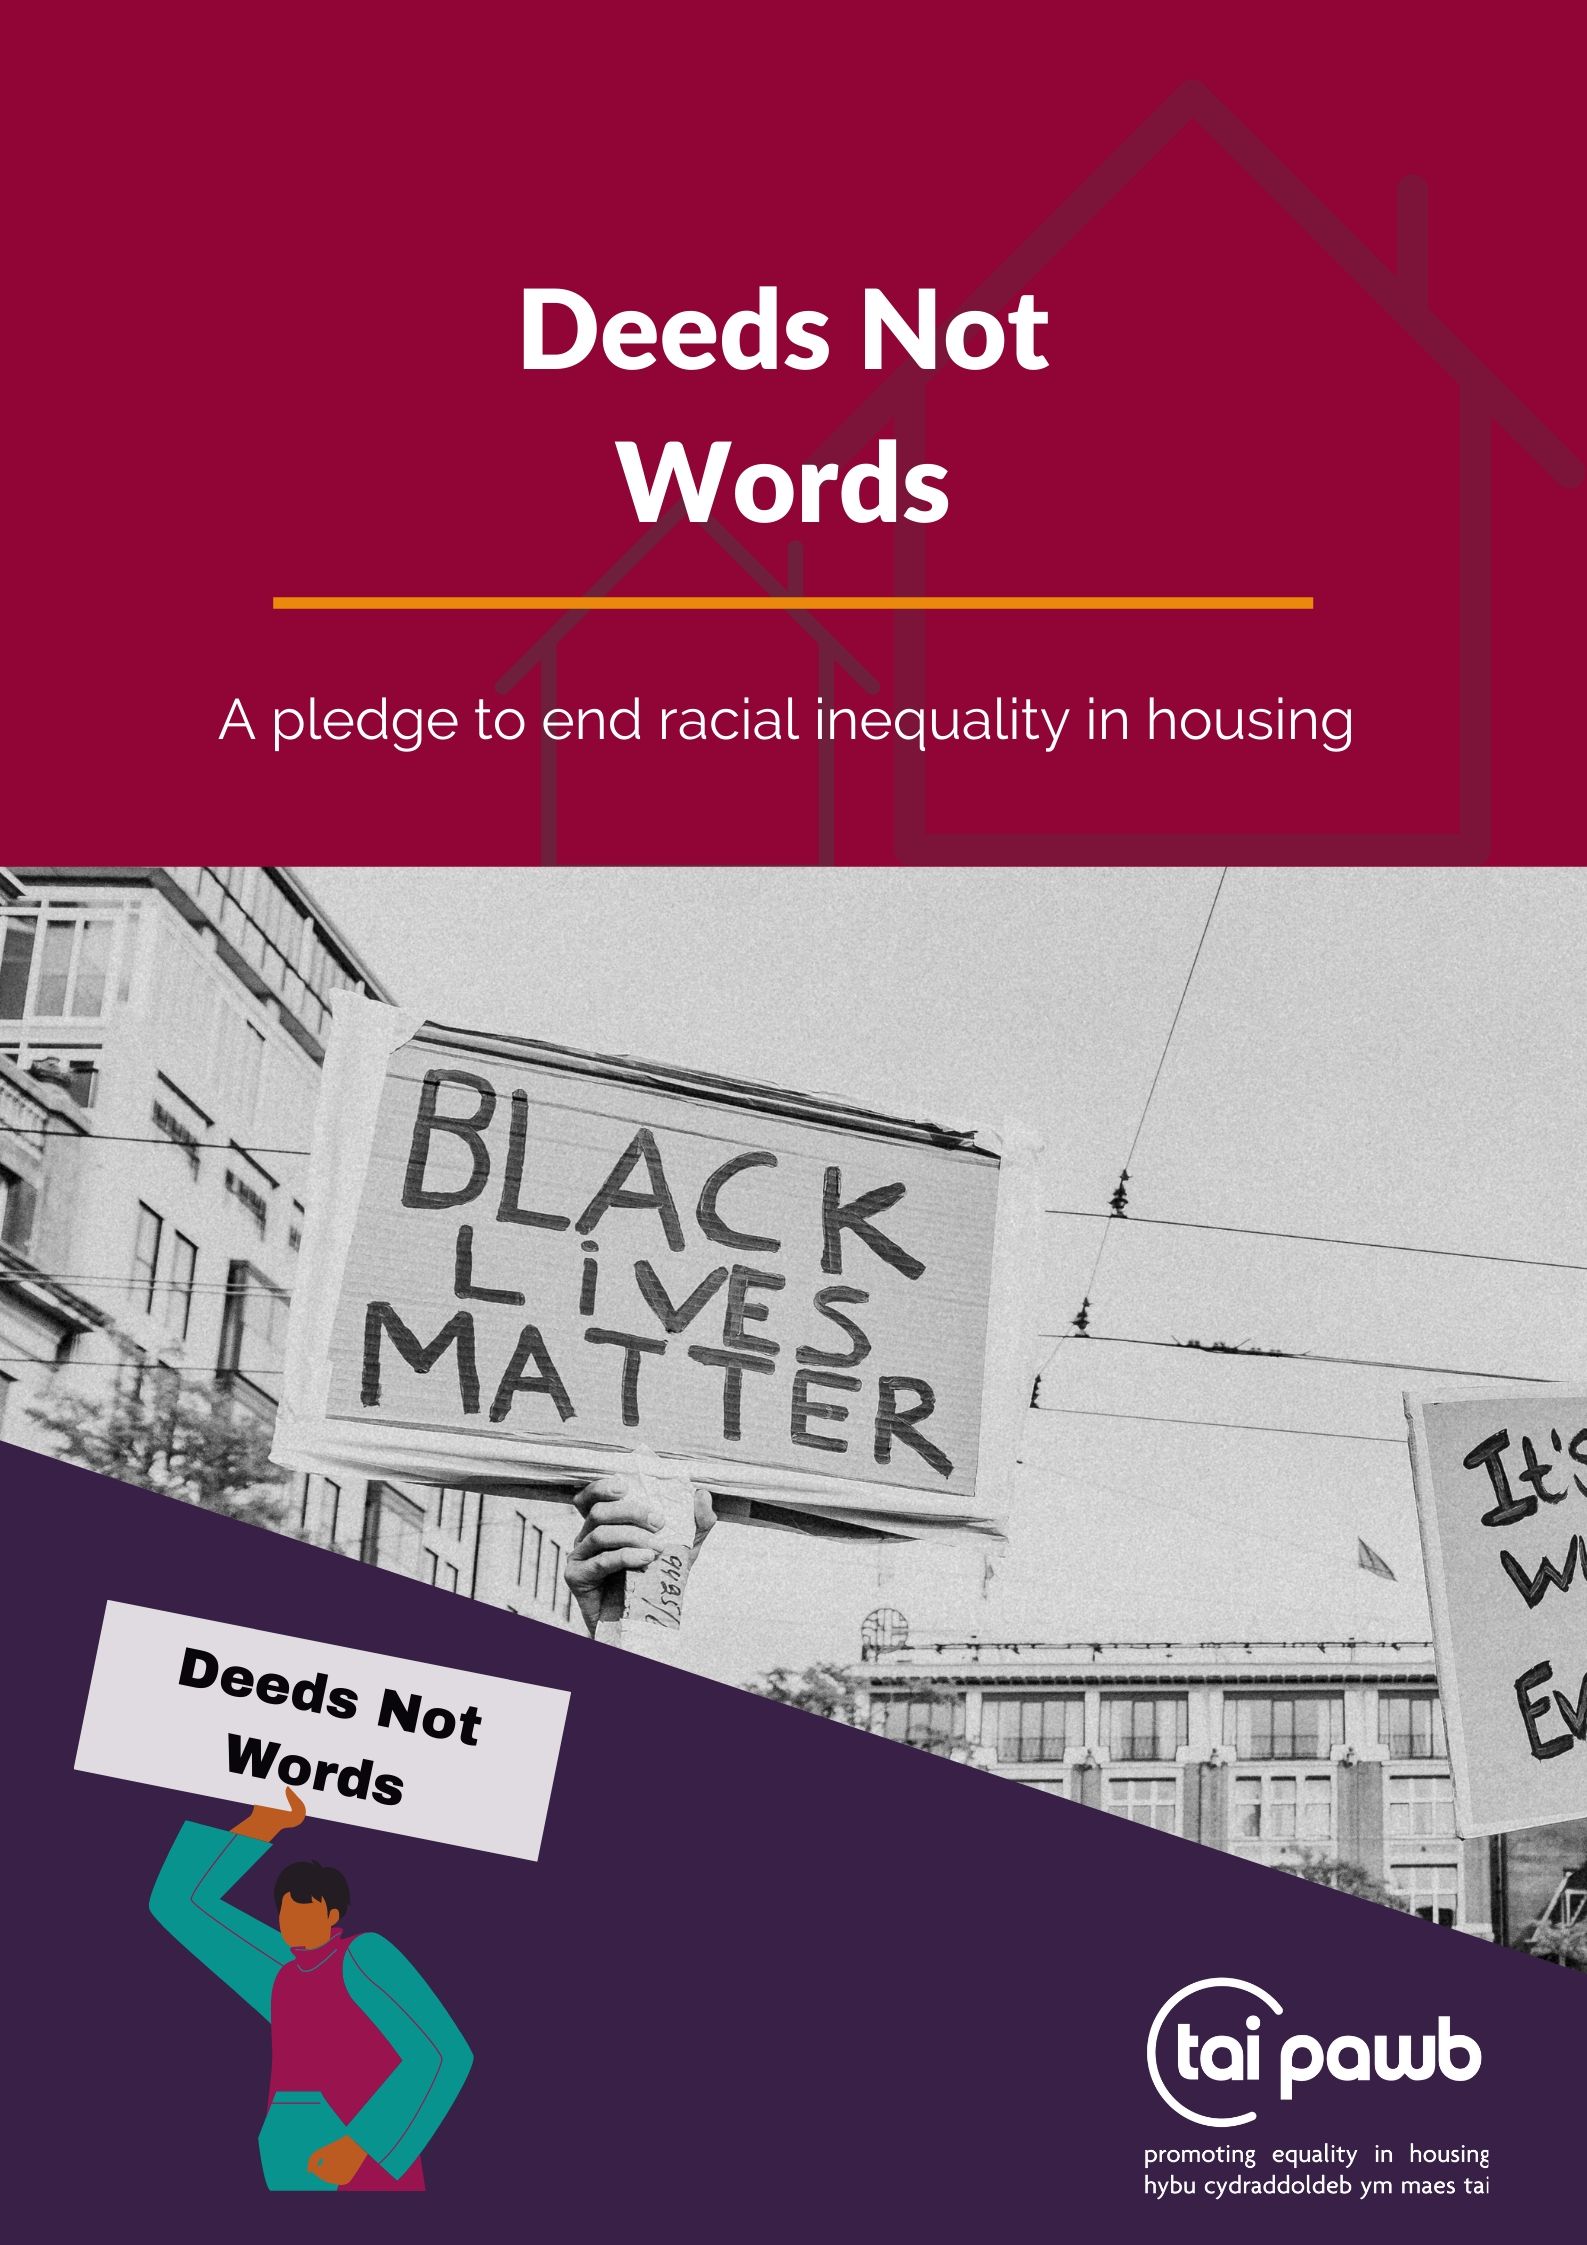 Deeds not Words: a pledge to end racial inequality in housing